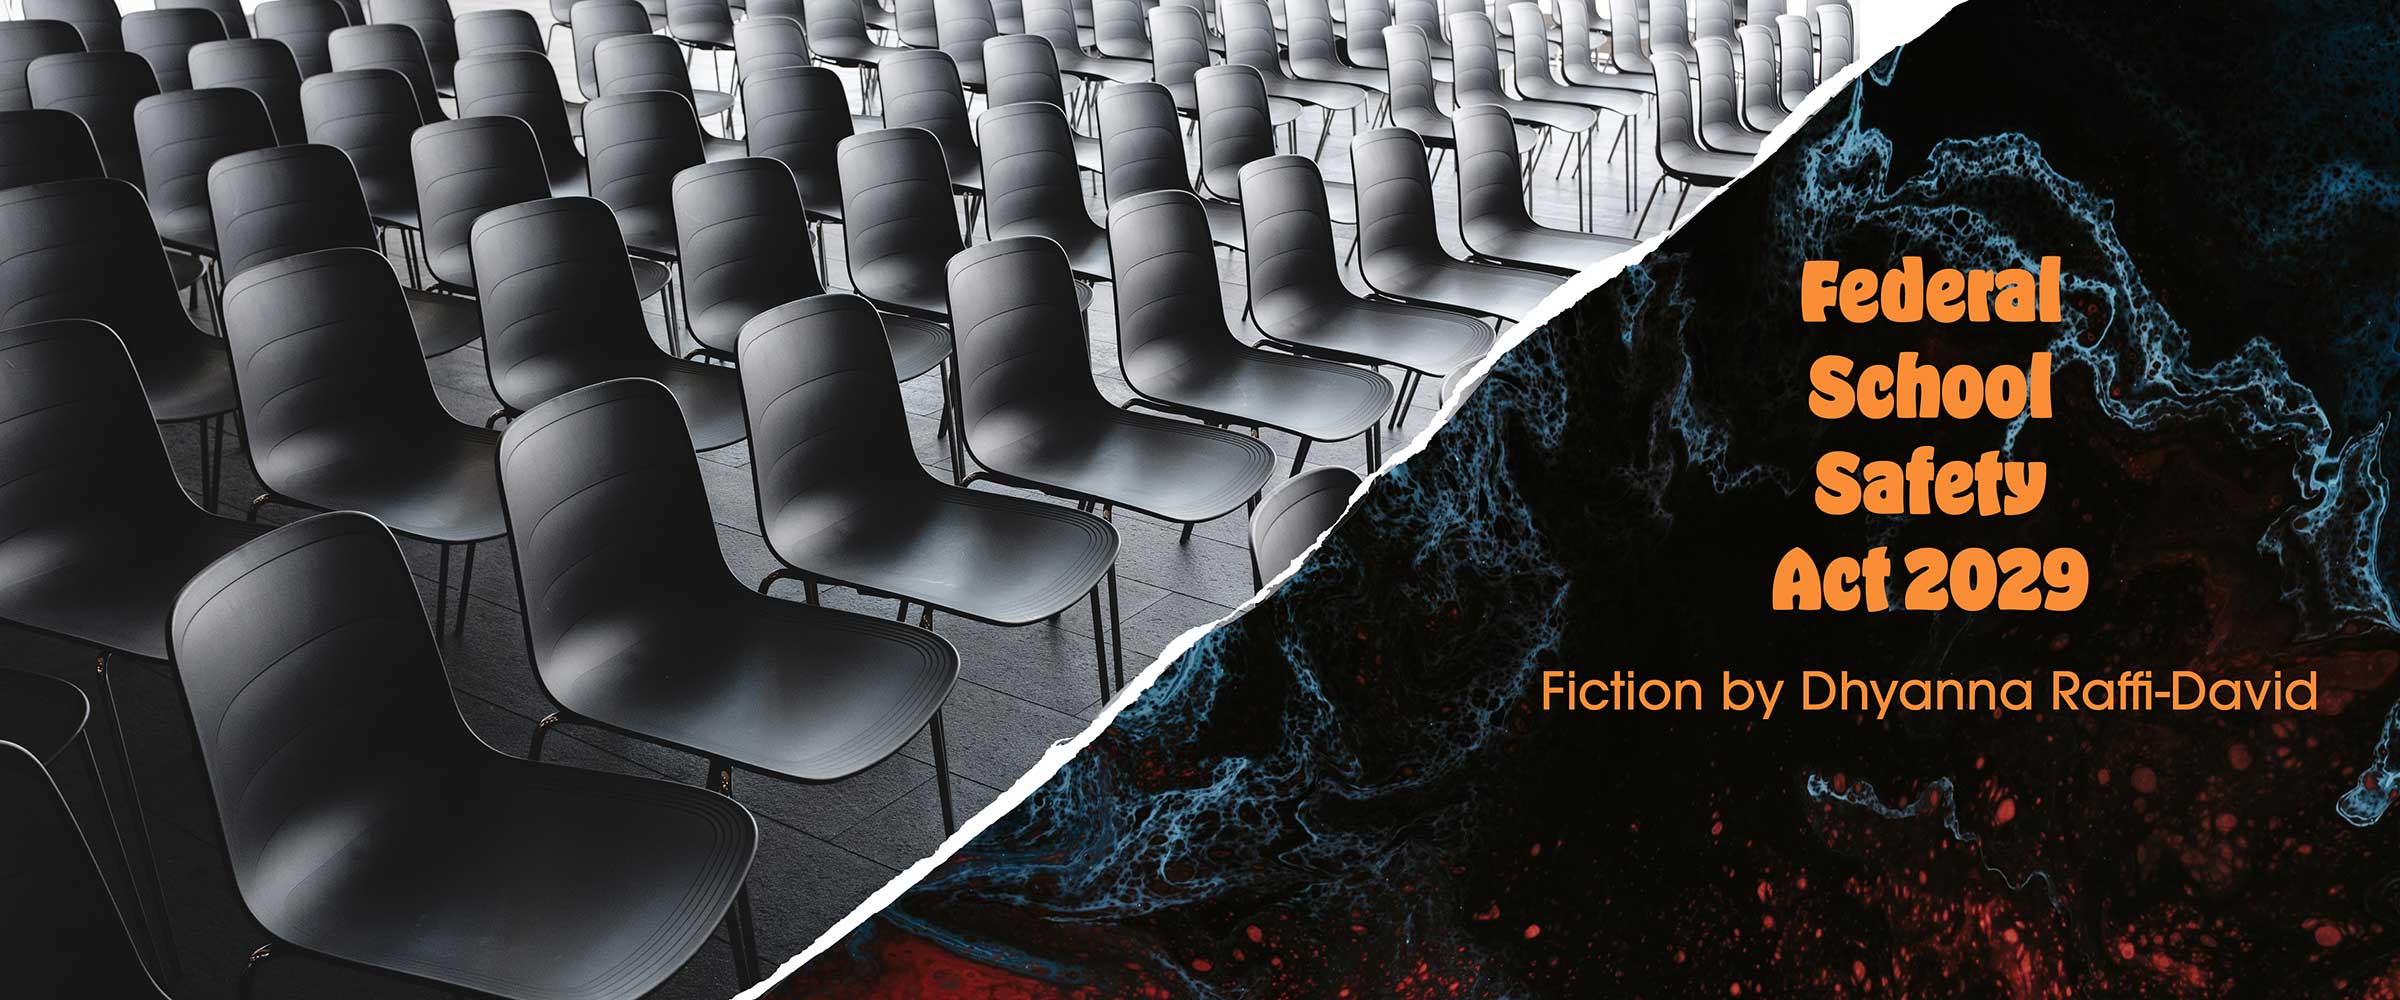 Federal School Safety Act 2029: Fiction by Dhyanna Raffi-David: a graphic with chairs and ominous water